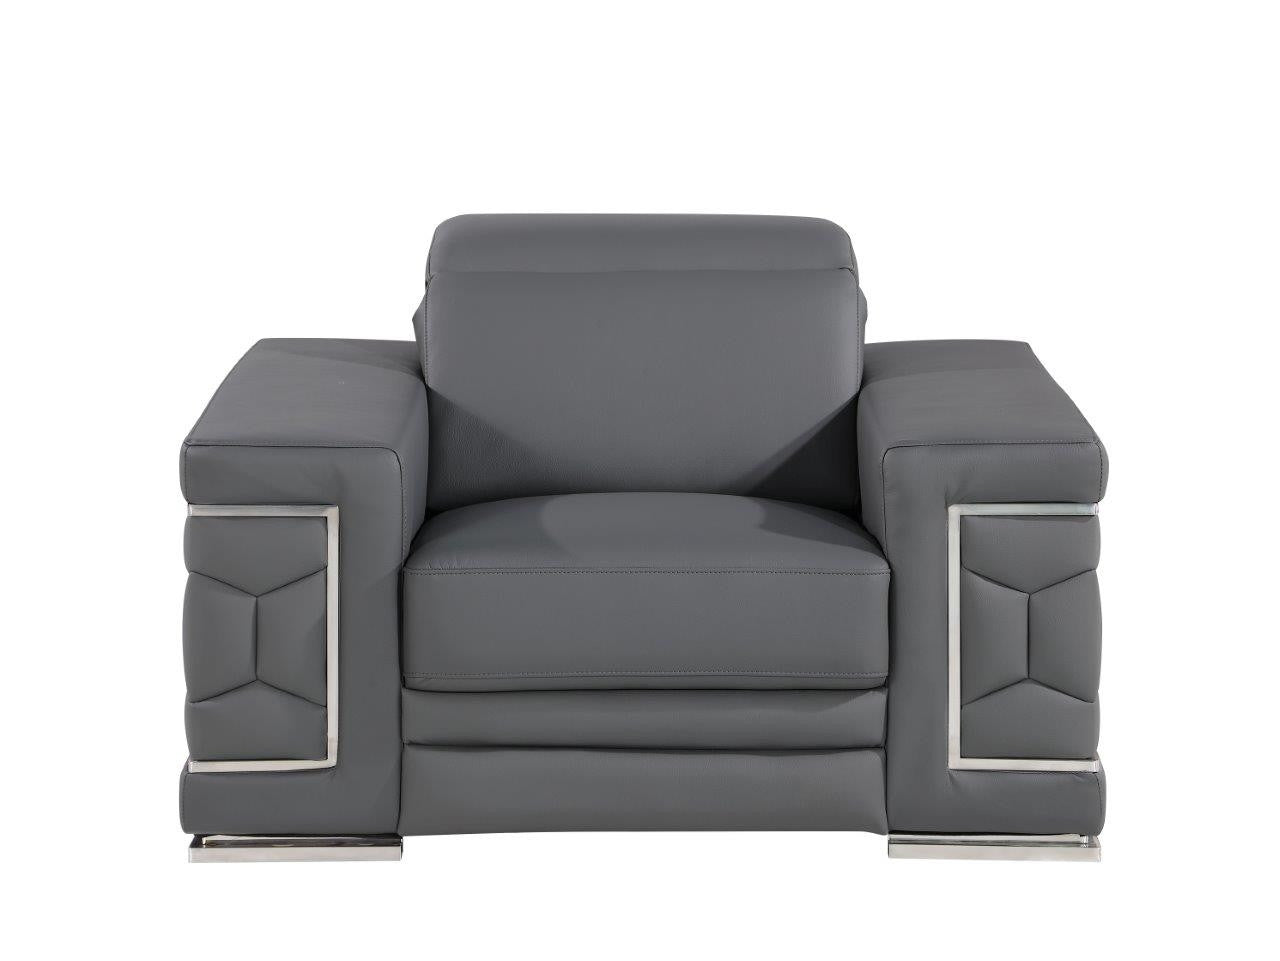 47" Granite Gray and Silver Genuine Leather Lounge Chair